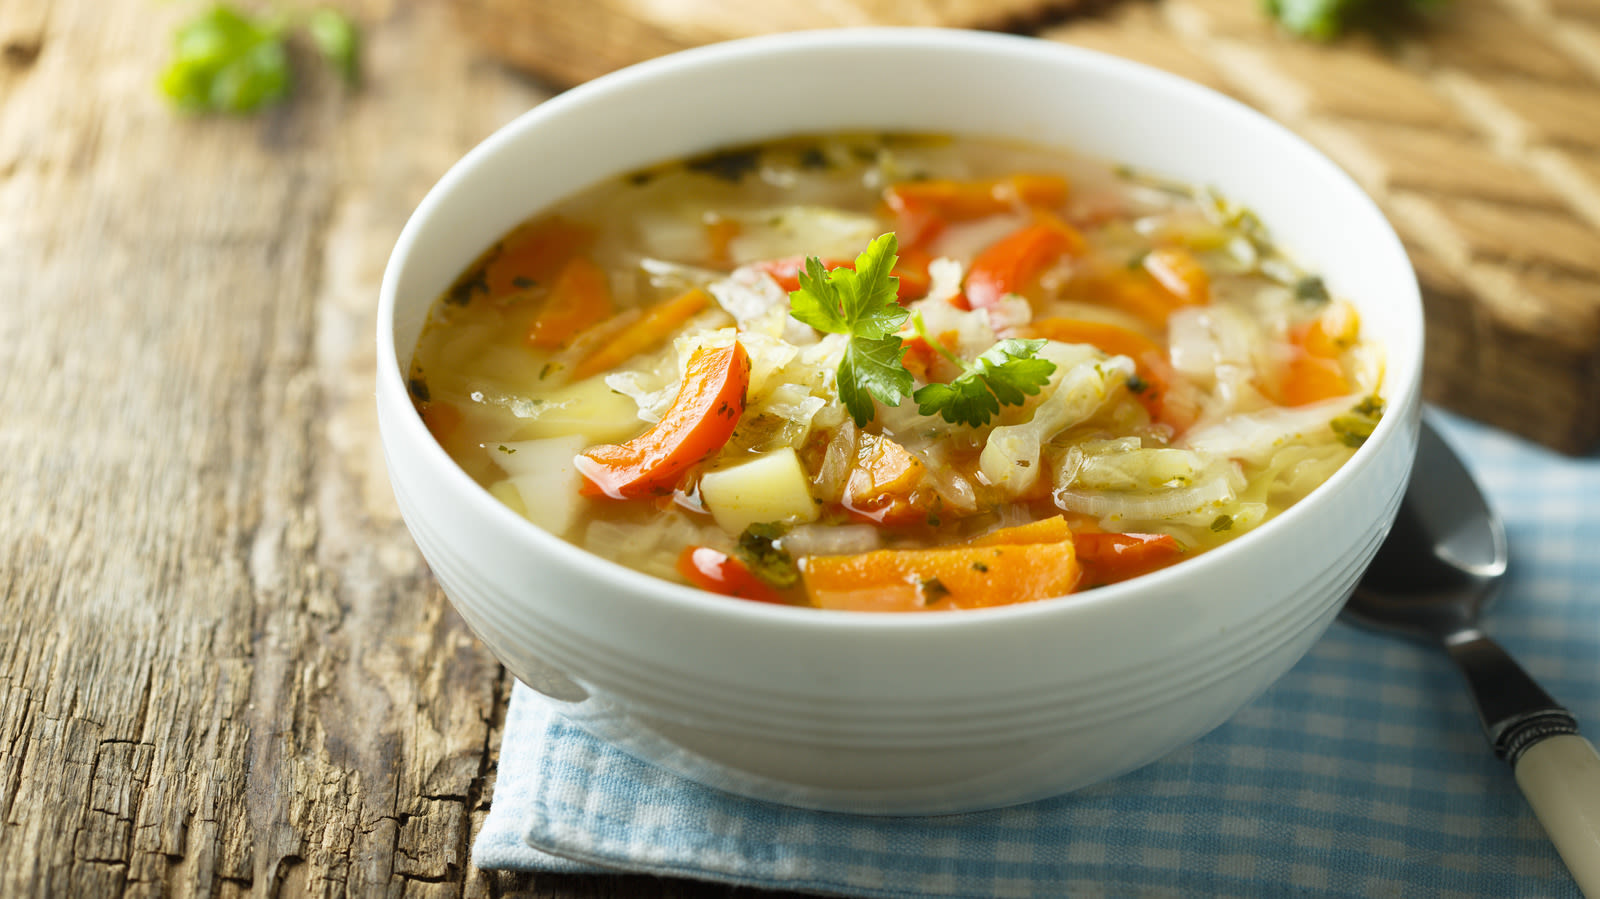 Why Your Soup Vegetables Are So Mushy (And How To Avoid It)